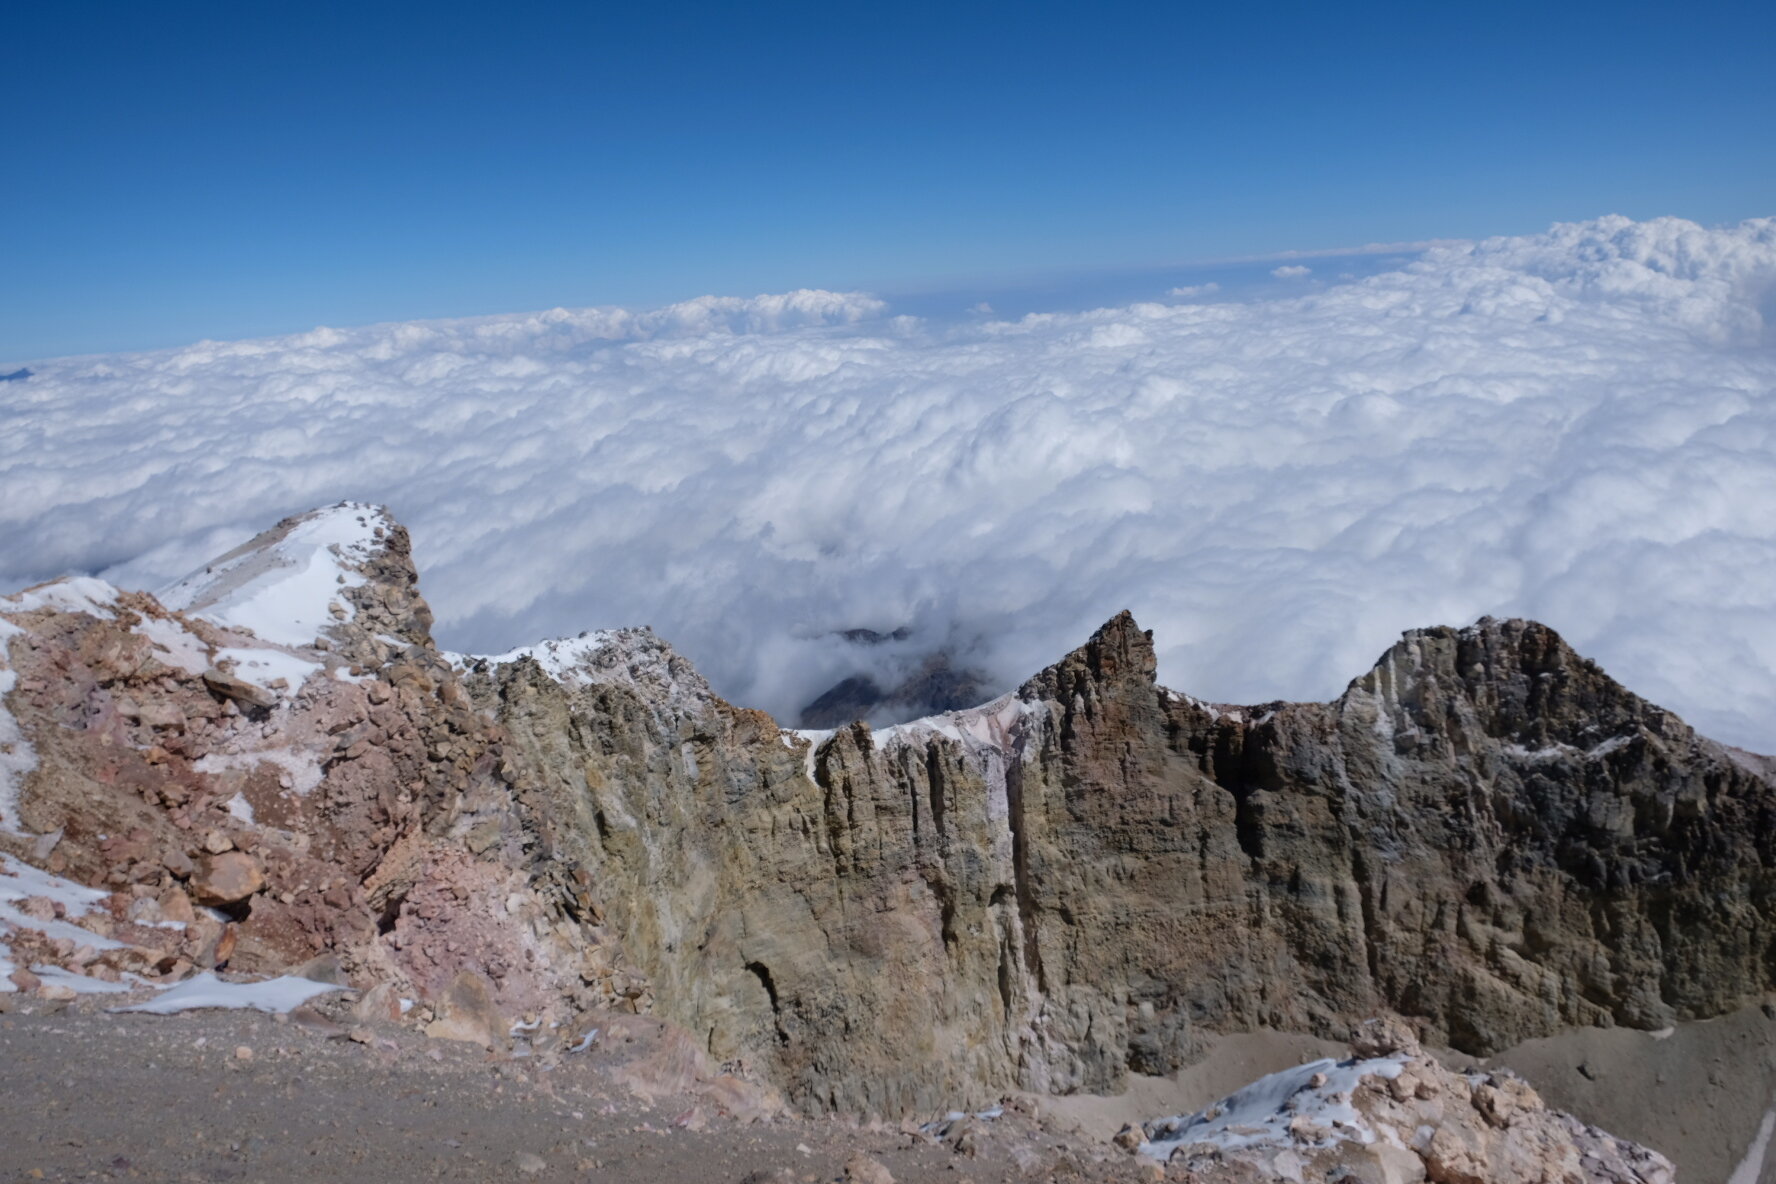  Taken from the summit of Orizaba, looking into the crater. 